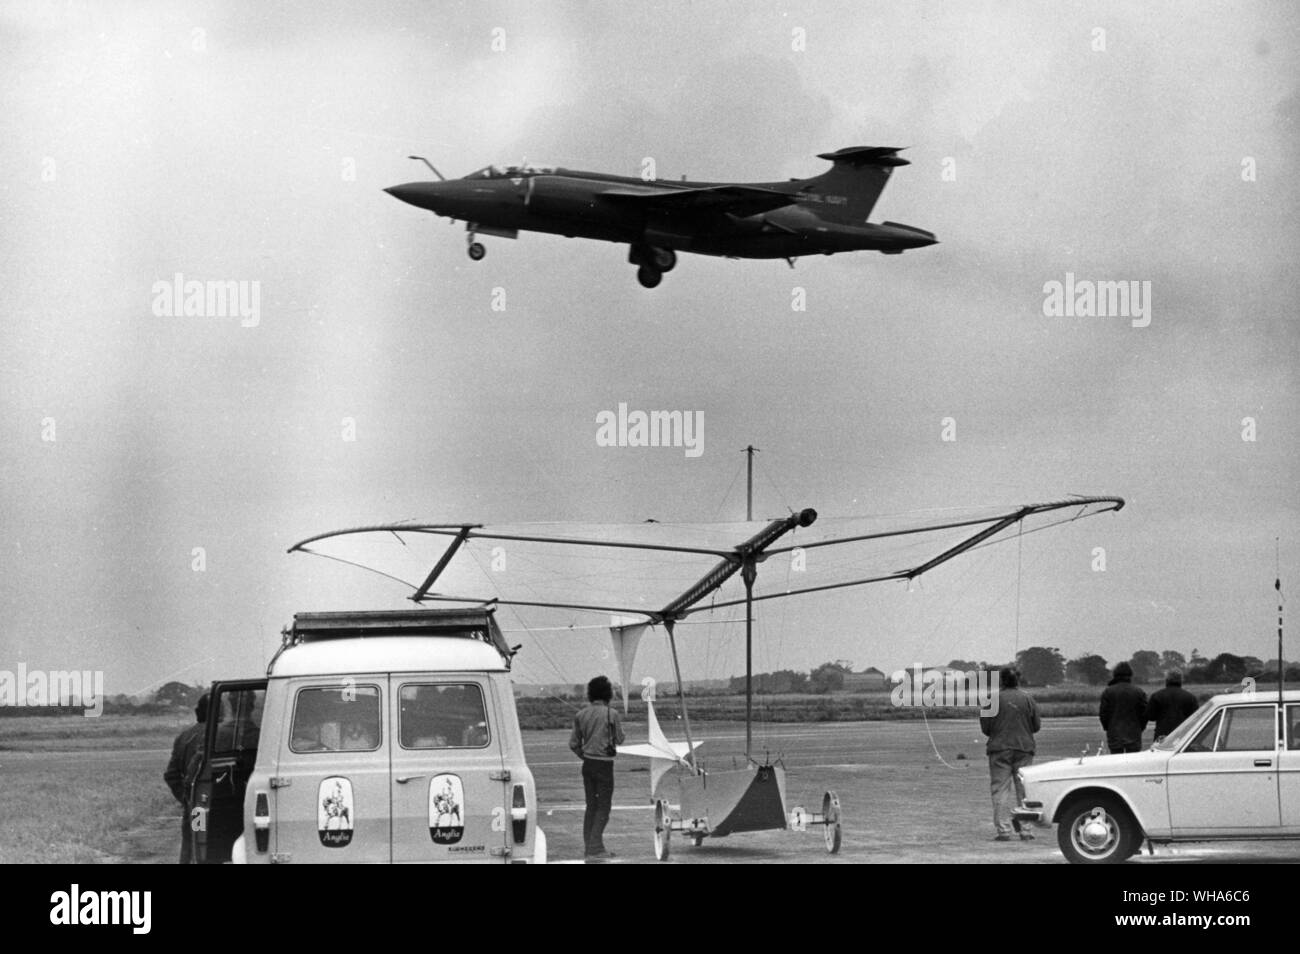 Anglia TV presents a Magnificent Man and his Flying Machine. The old and the new..... A Buccaneer Jet thunders over the Cayley Glider. . Stock Photo